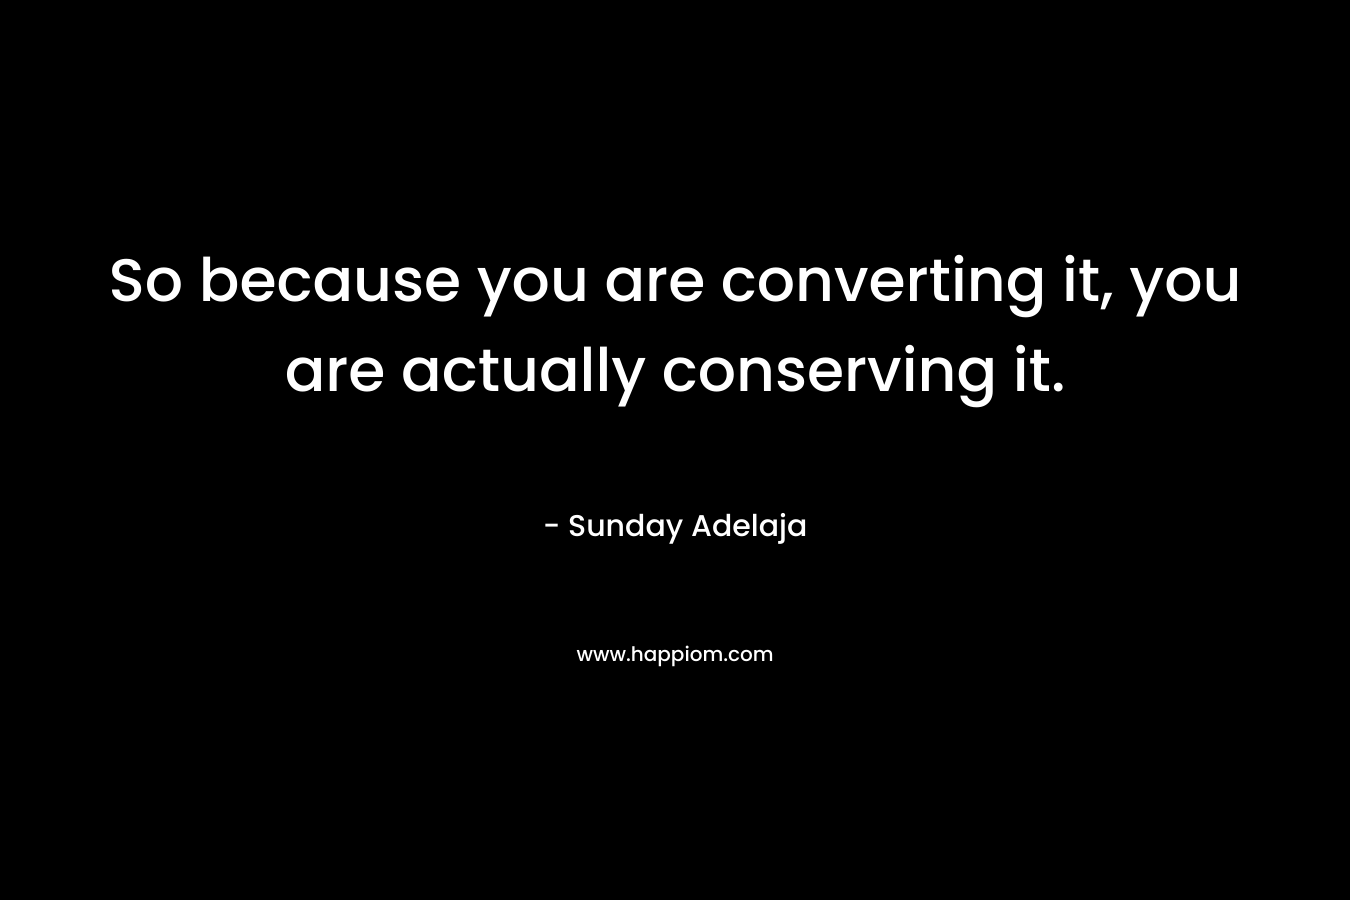 So because you are converting it, you are actually conserving it.